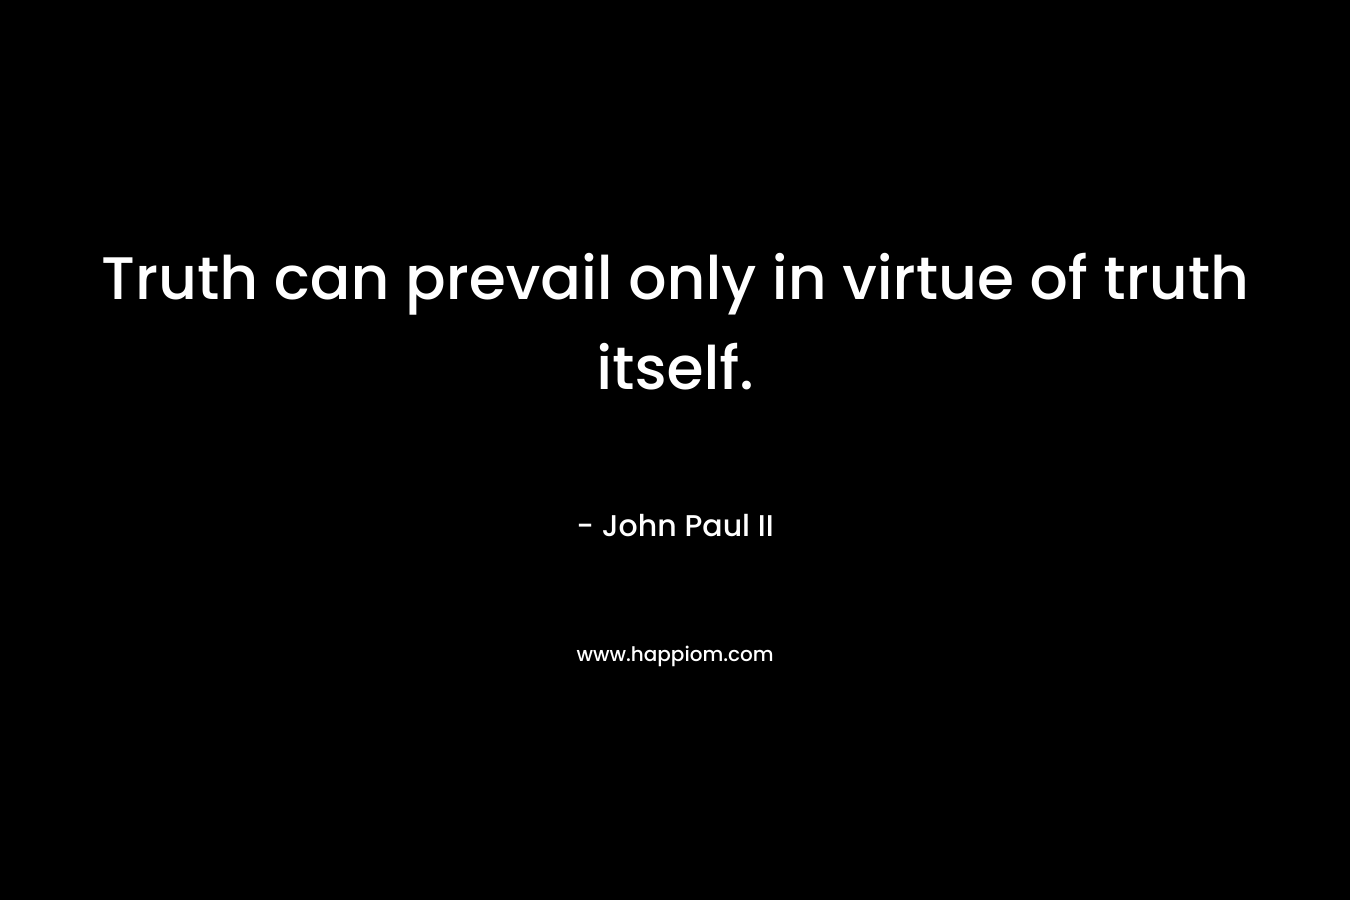 Truth can prevail only in virtue of truth itself. – John Paul II